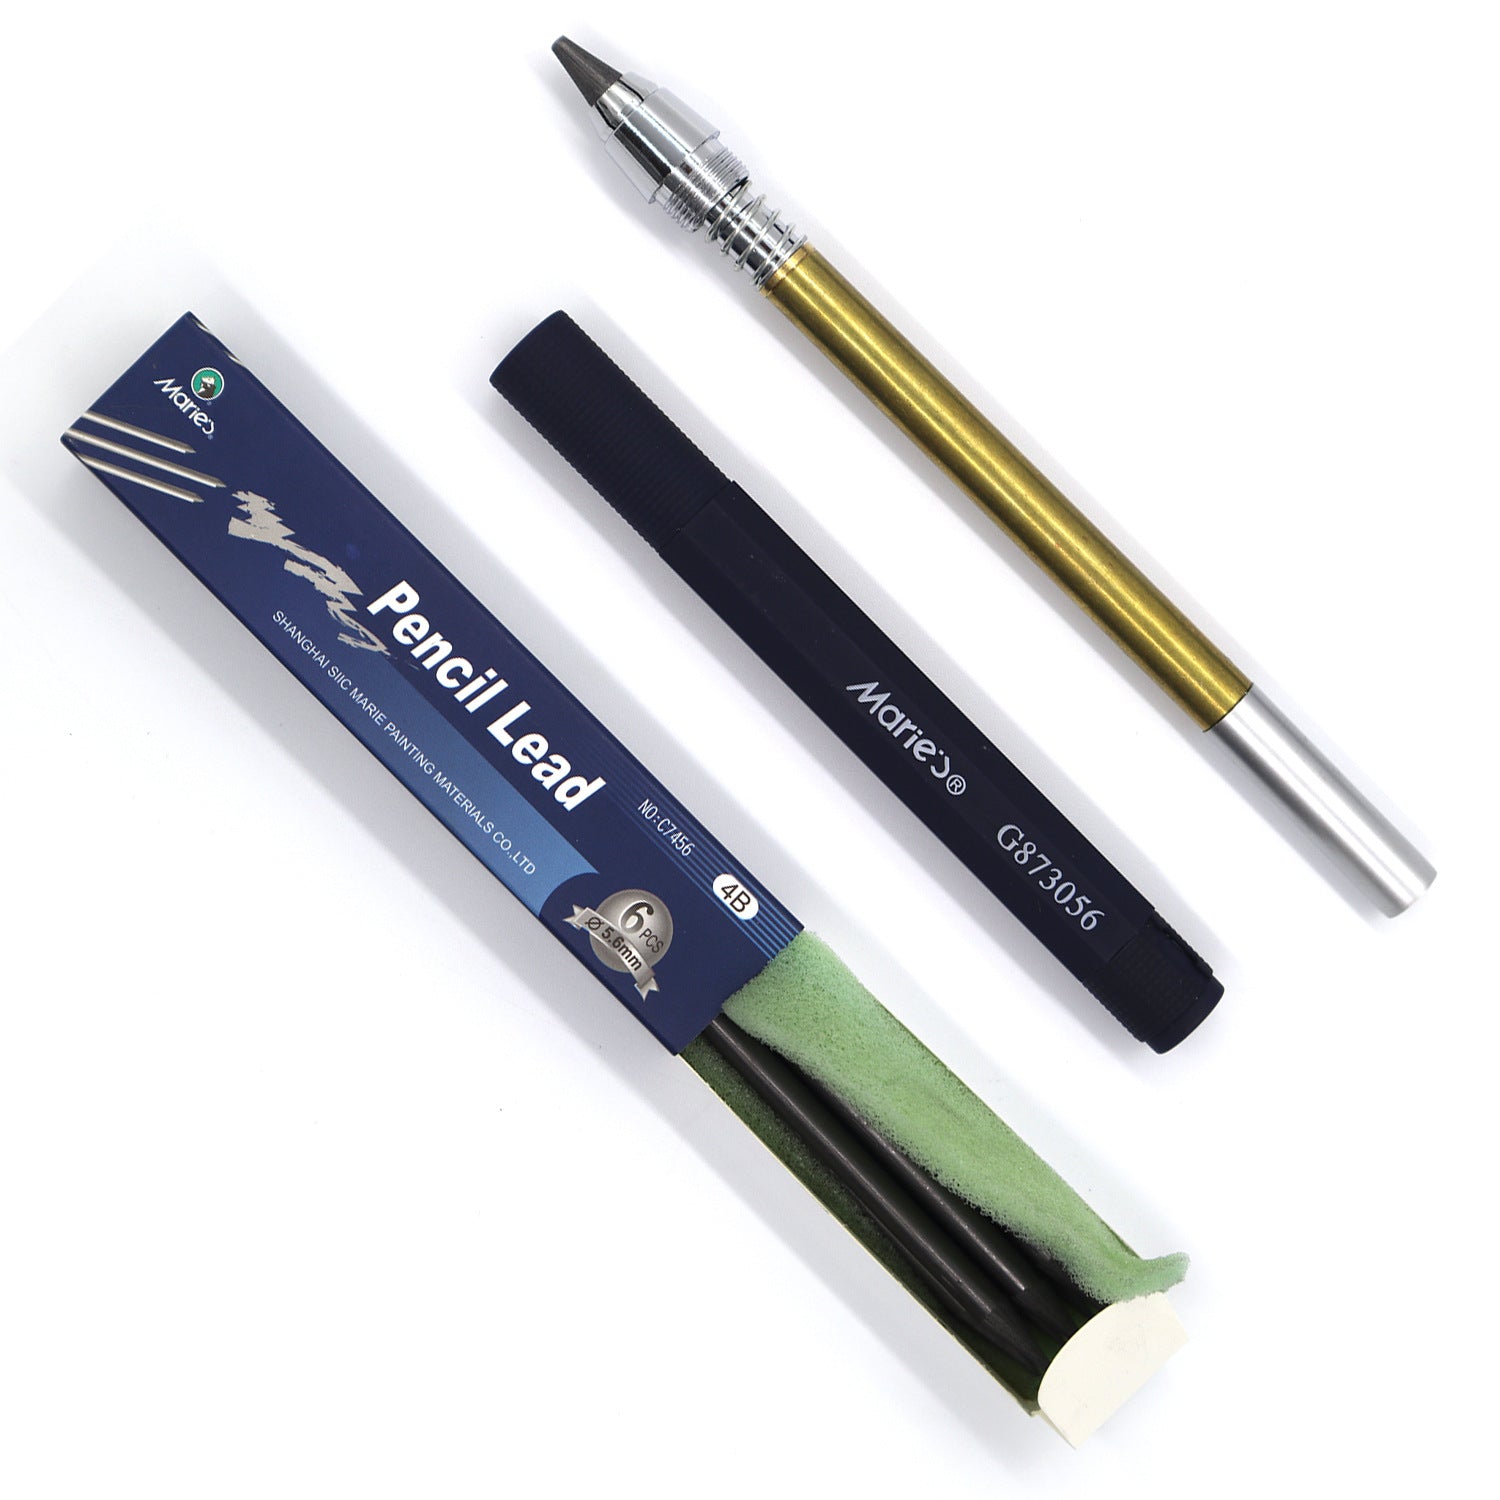 5.6mm Mechanical Pencil Lead Holder Clutch with 6pcs 4B Pencil Leads